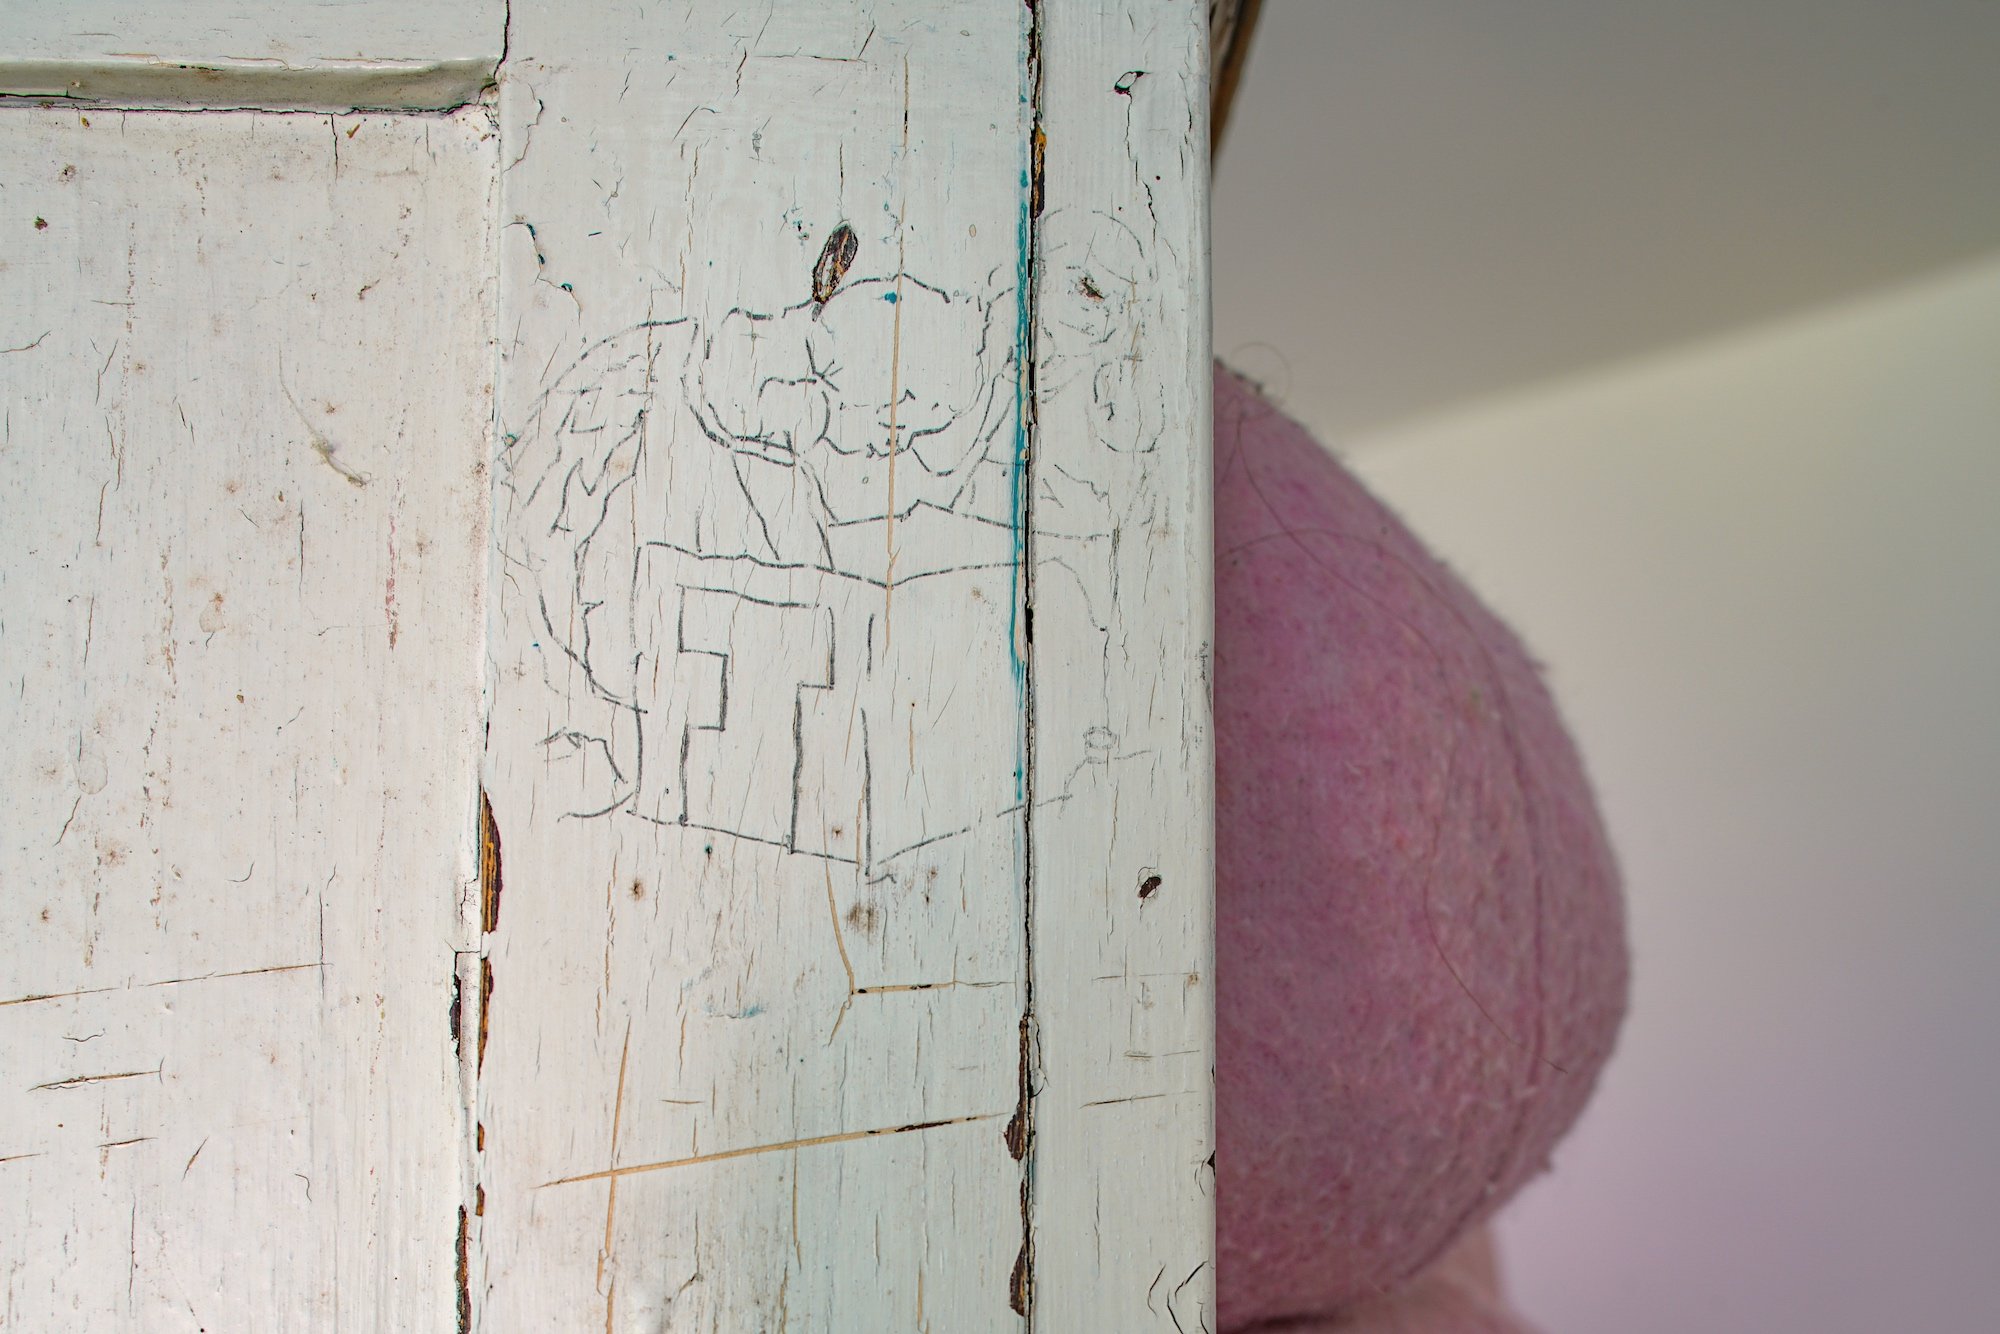  Just one more little squeeze please Louise  (detail shot), 2022   Installation of found wooden cupboard, scuba, boiled wool, fleece, recycled fibrefill, repurposed fabric and foam scrap, graphite and carbon paper transfer,  approximately 178 x 67 x 